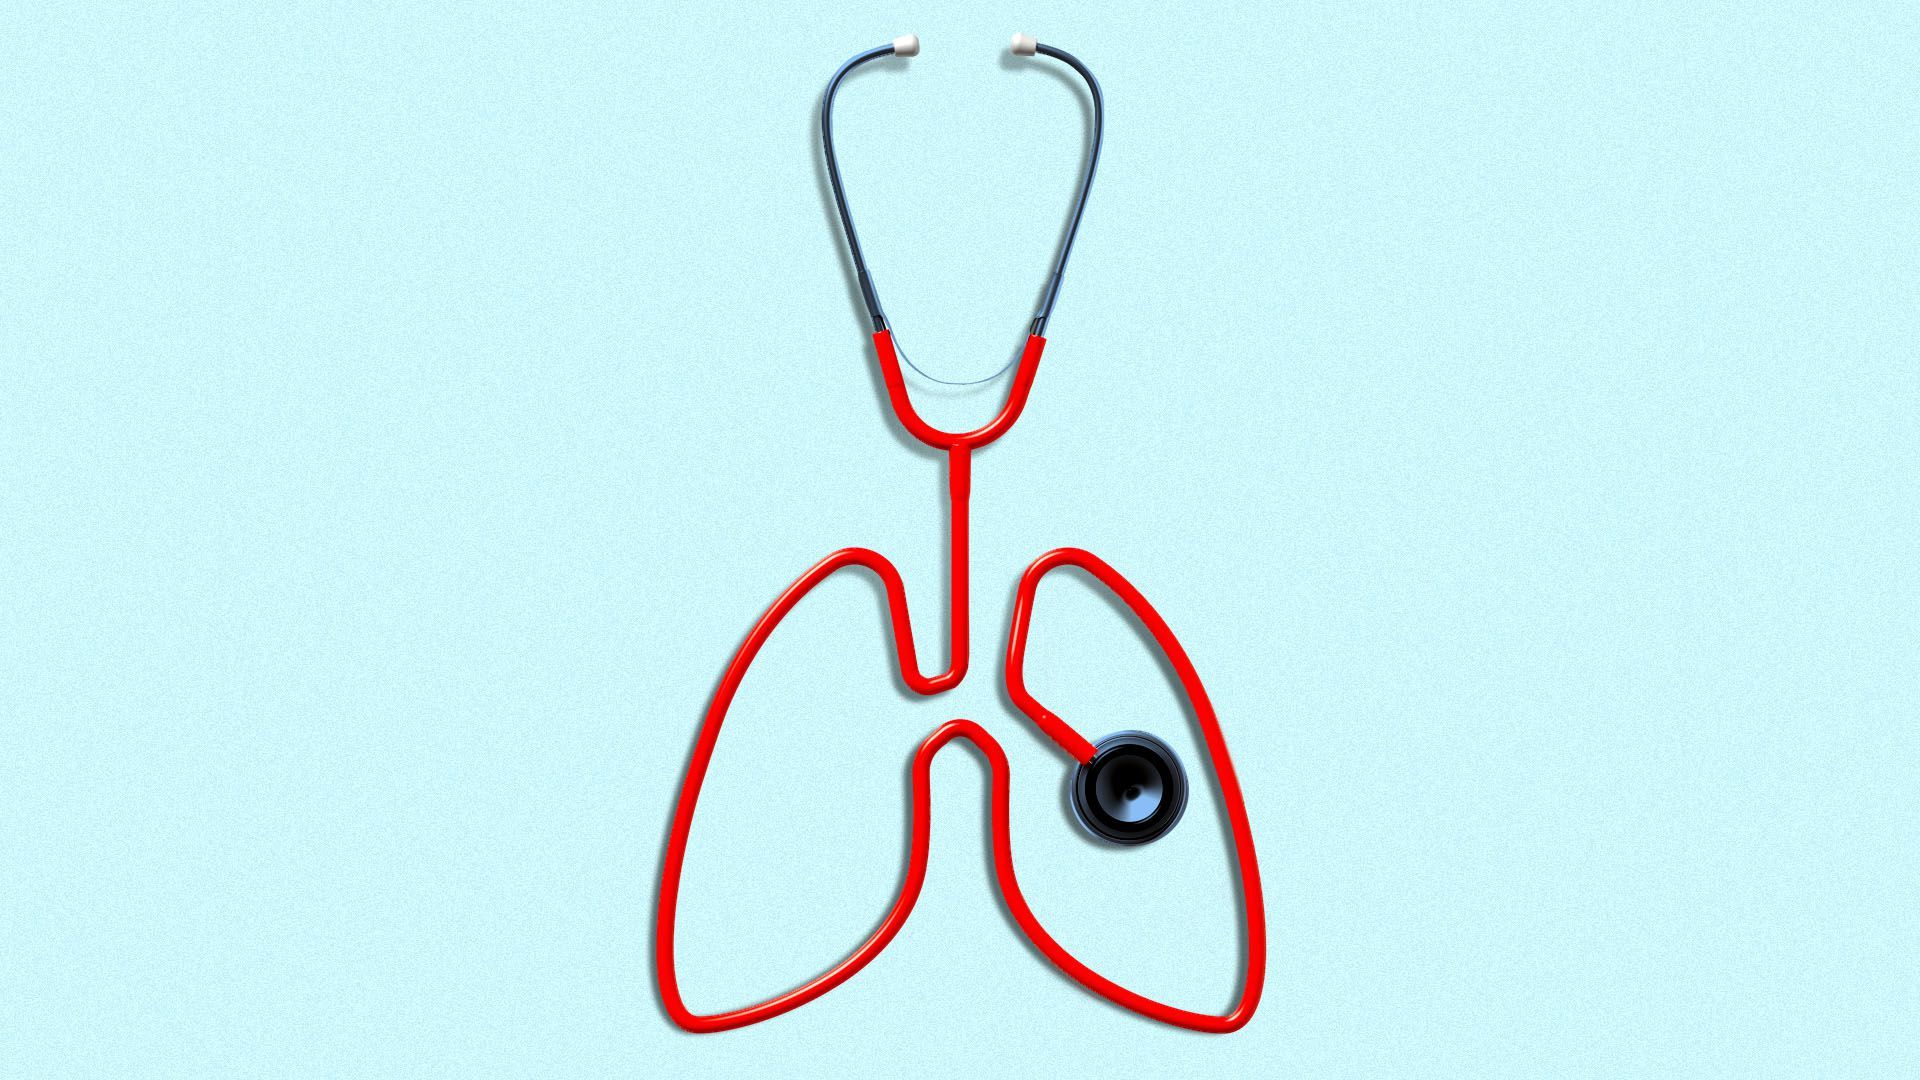 Illustration of a stethoscope in the shape of a pair of lungs.